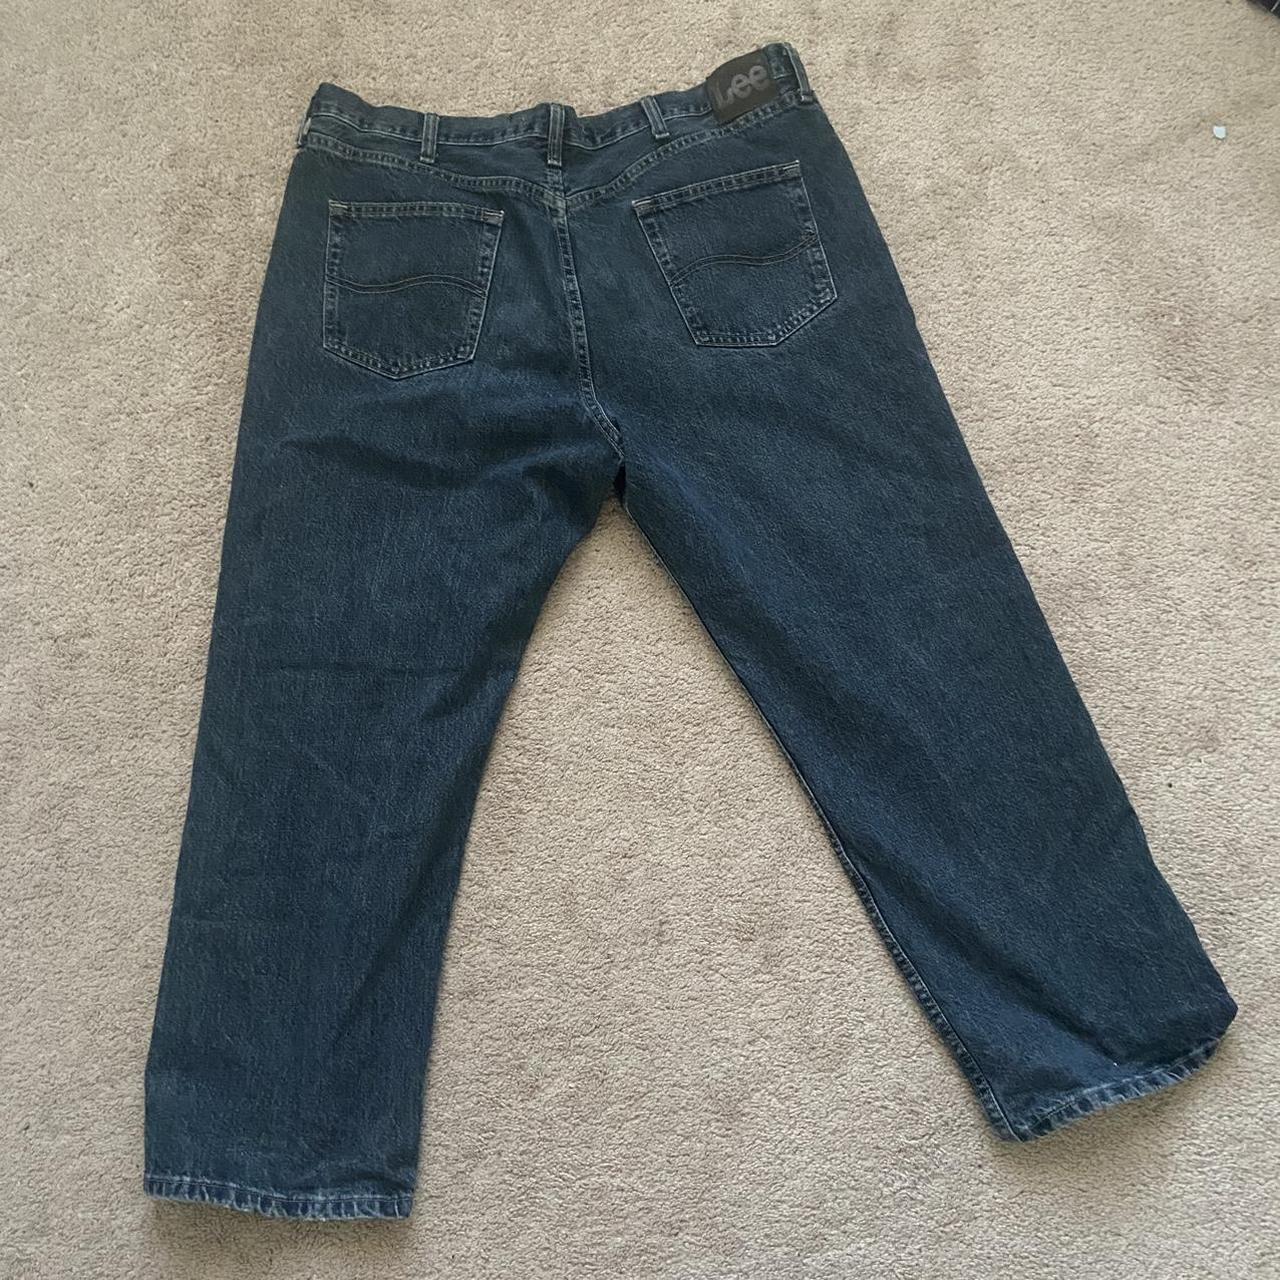 Lee Jeans Relaxed Fit 42x29 - Depop